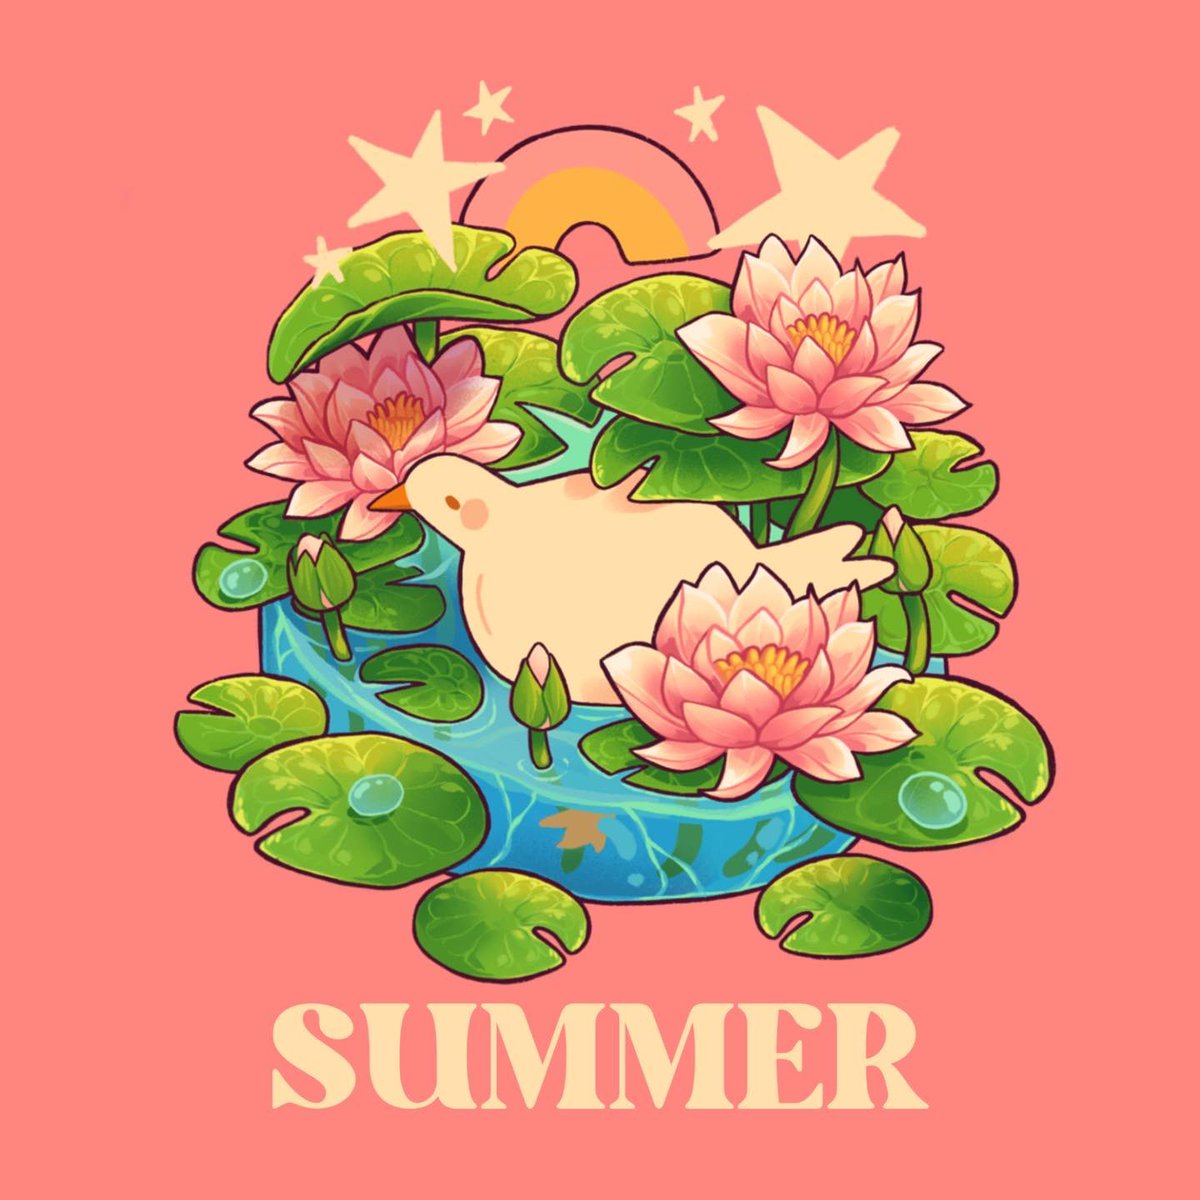 「Summer duck 🦆✨ 」|🌿lana 🌿 SHOP OPEN Bat fairy collection live ❤️のイラスト